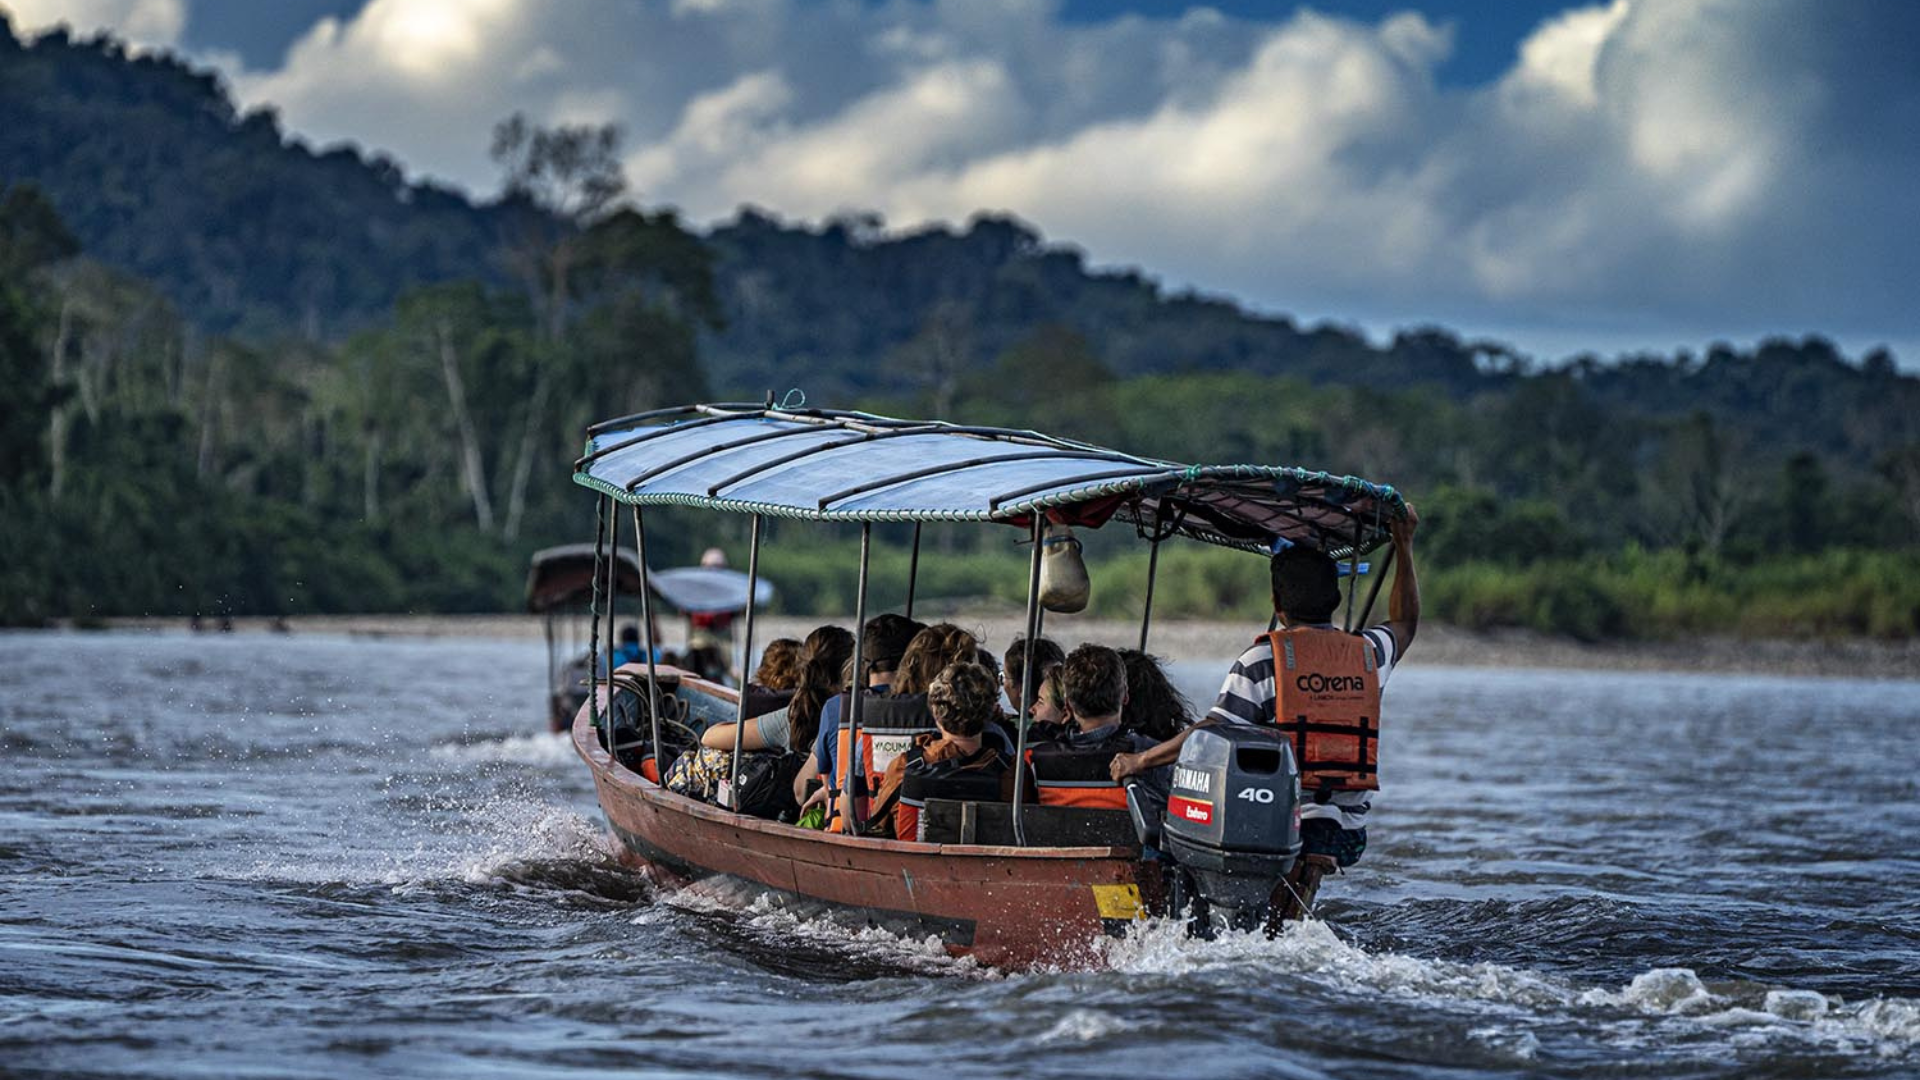 Students on a boat riding through the Amazon